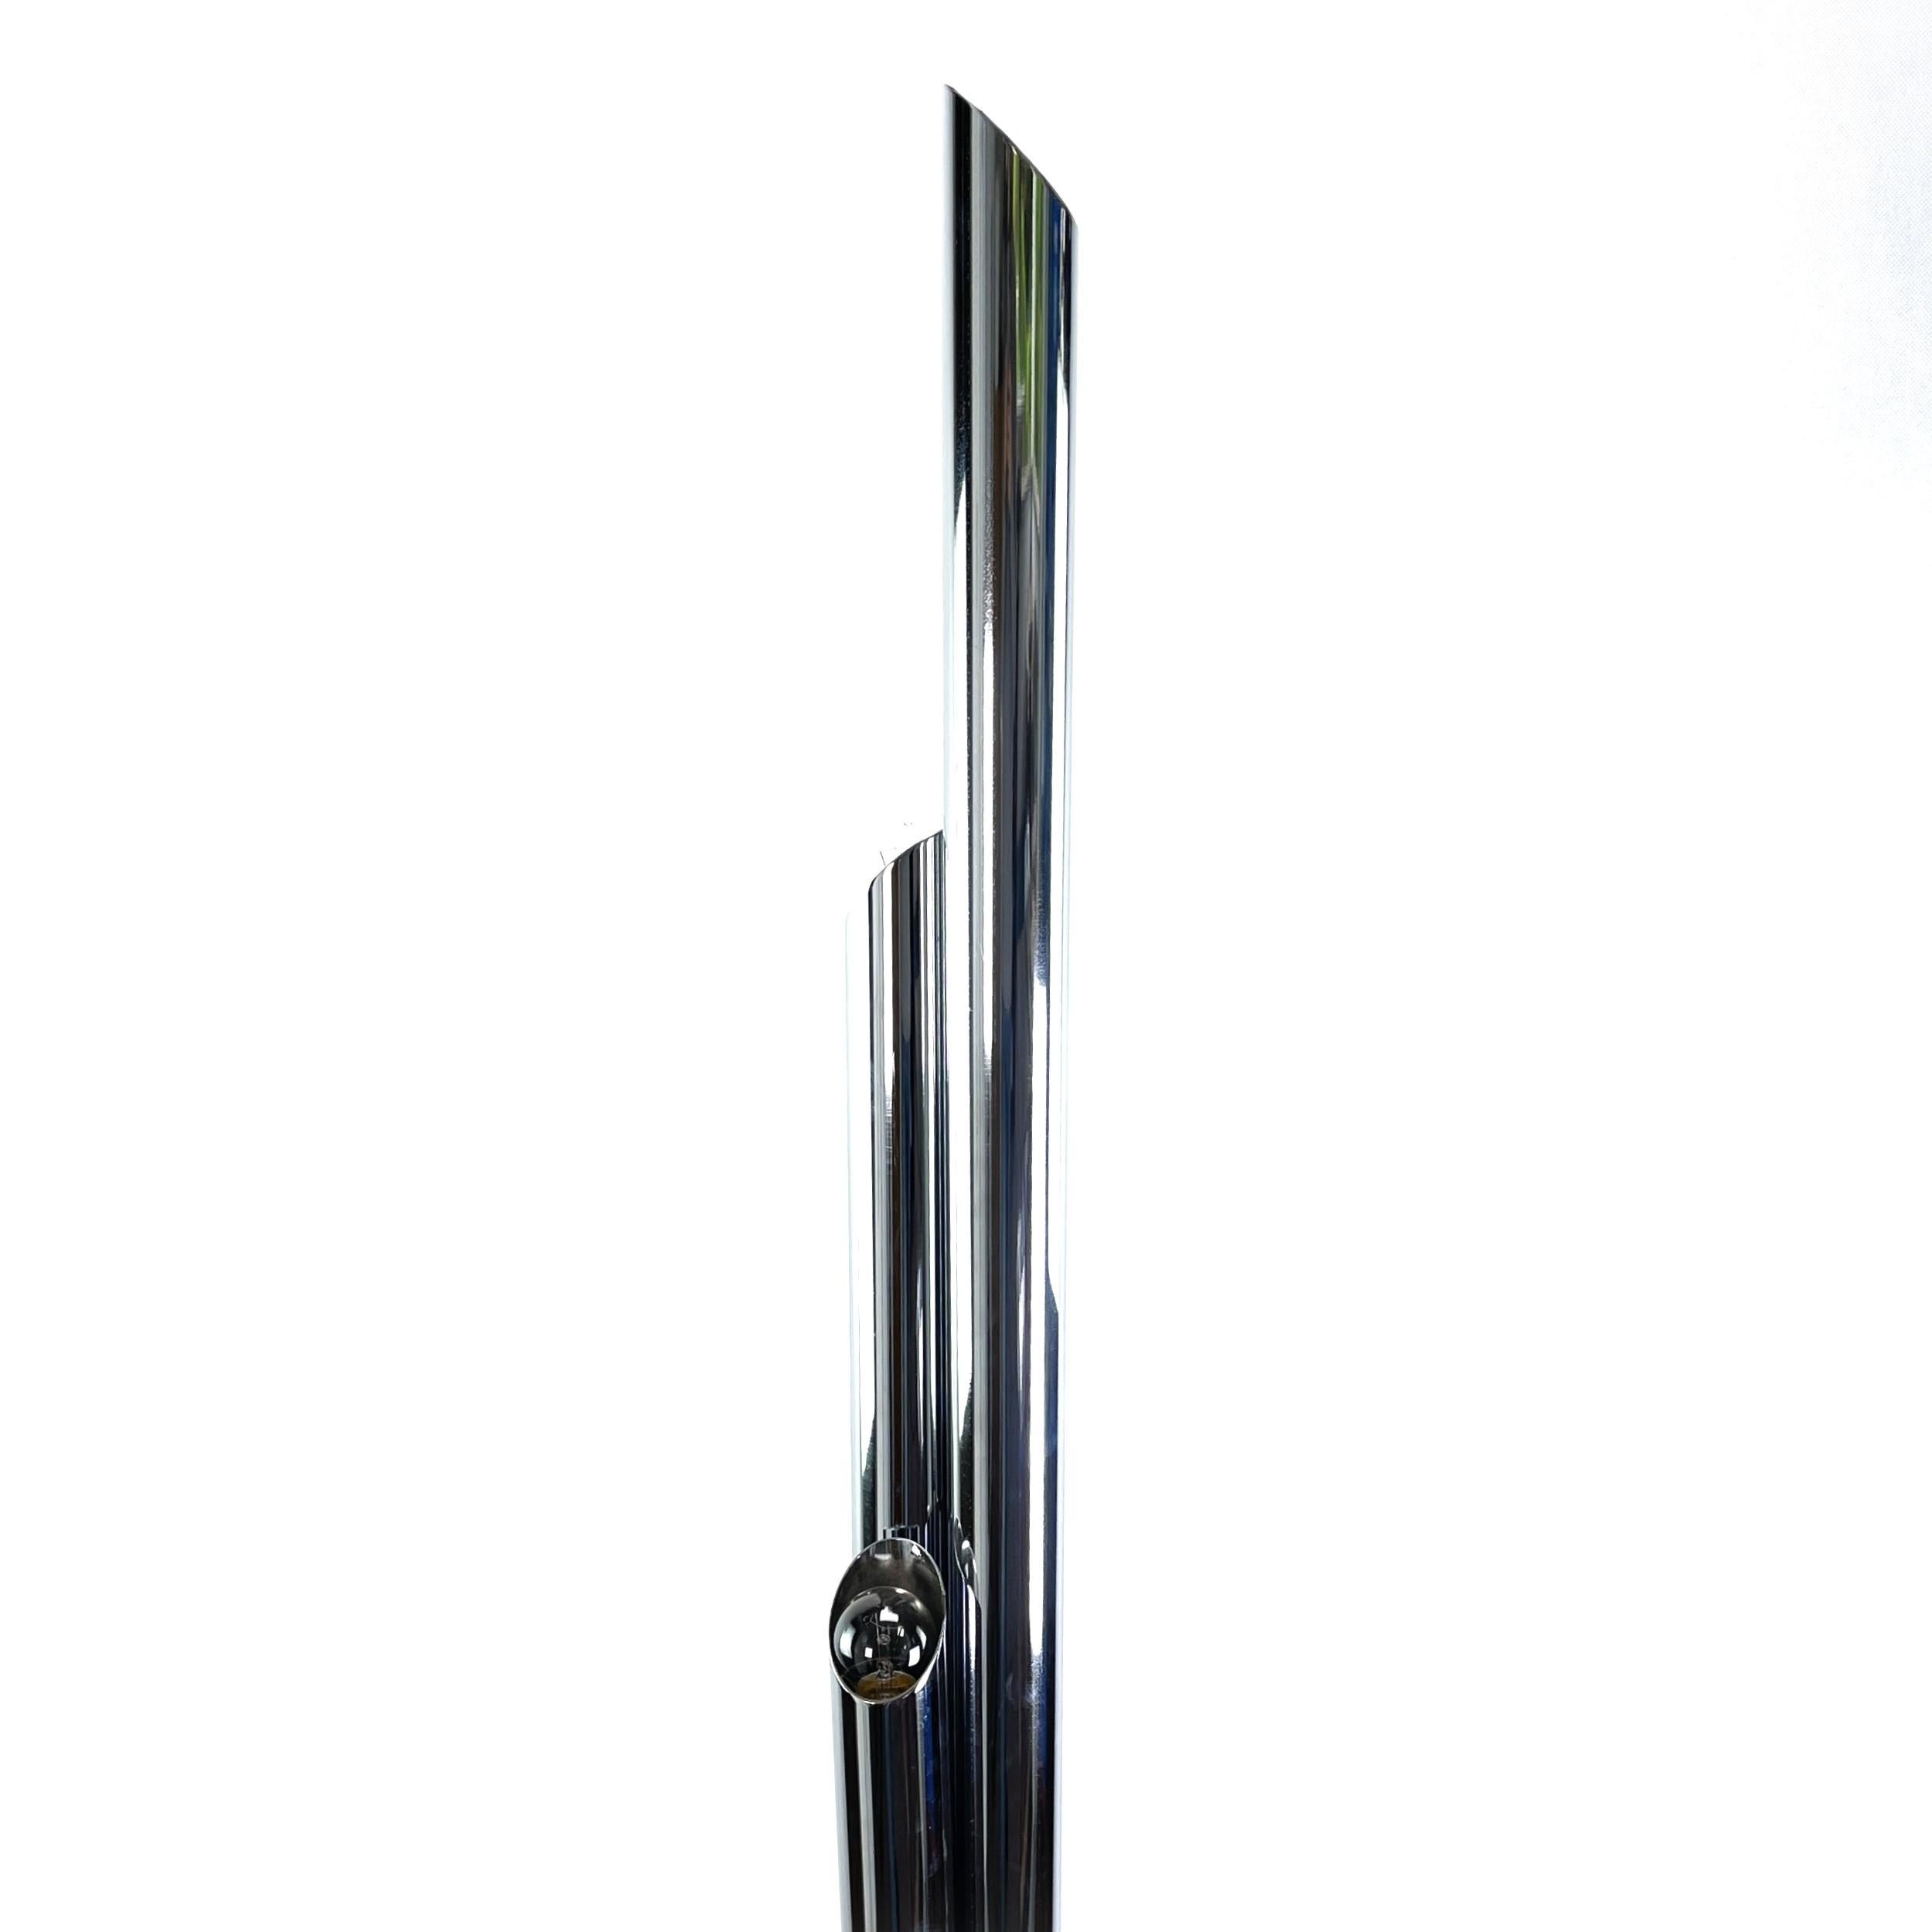 Italian Vintage Floor Lamp - 1970s

The large Italian lamp is a real design classic from the 60s / 70s. The floor lamp is an original and gives a pleasant light. The Italian Vintage Floor Lamp chrome from the 1970s is a stunning piece that exudes